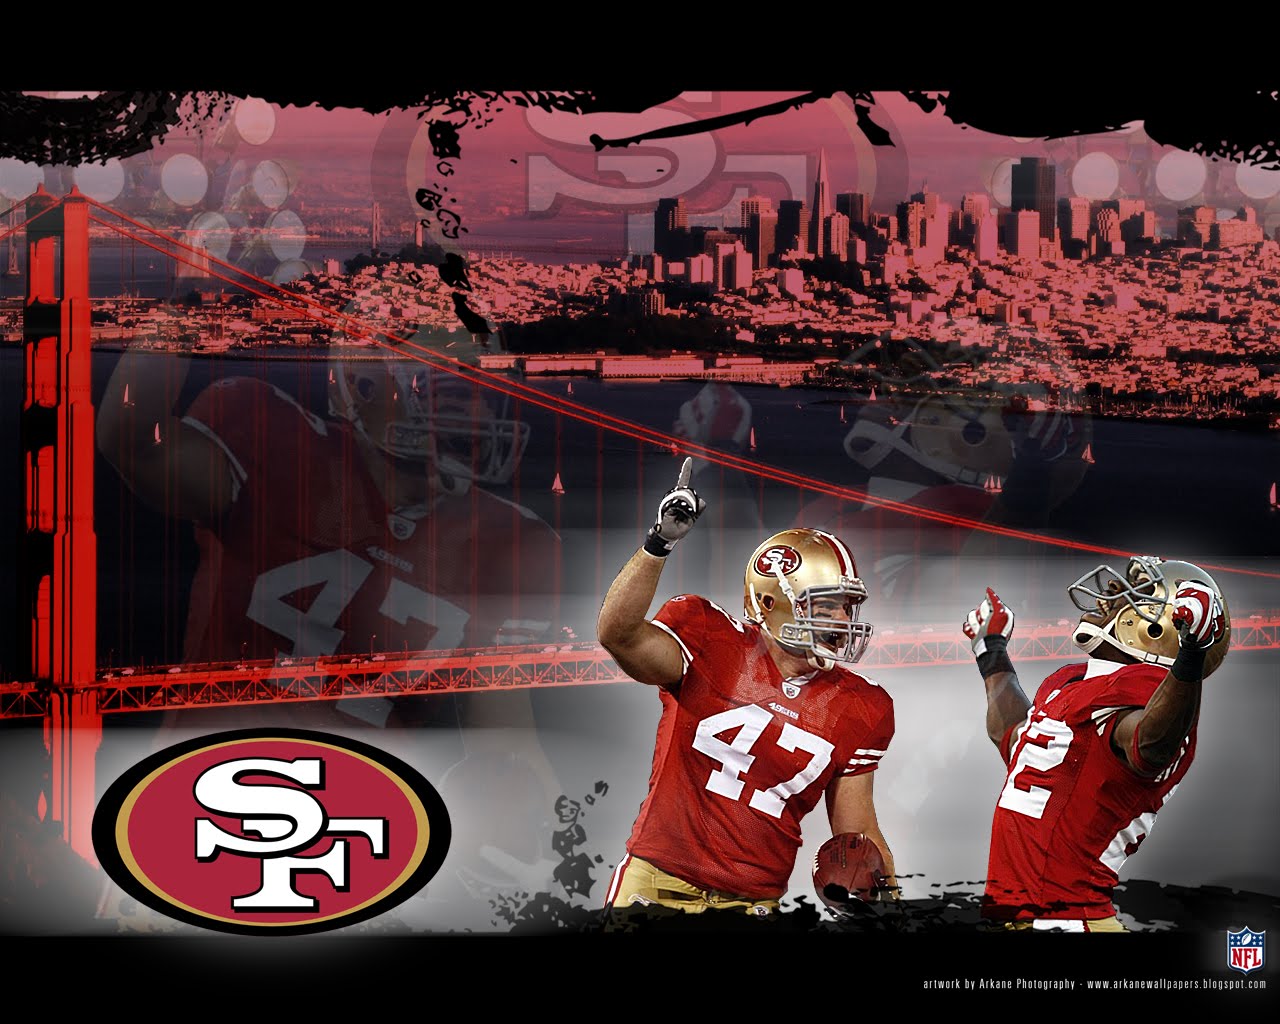 New San Francisco 49ers background San Francisco 49ers wallpapers